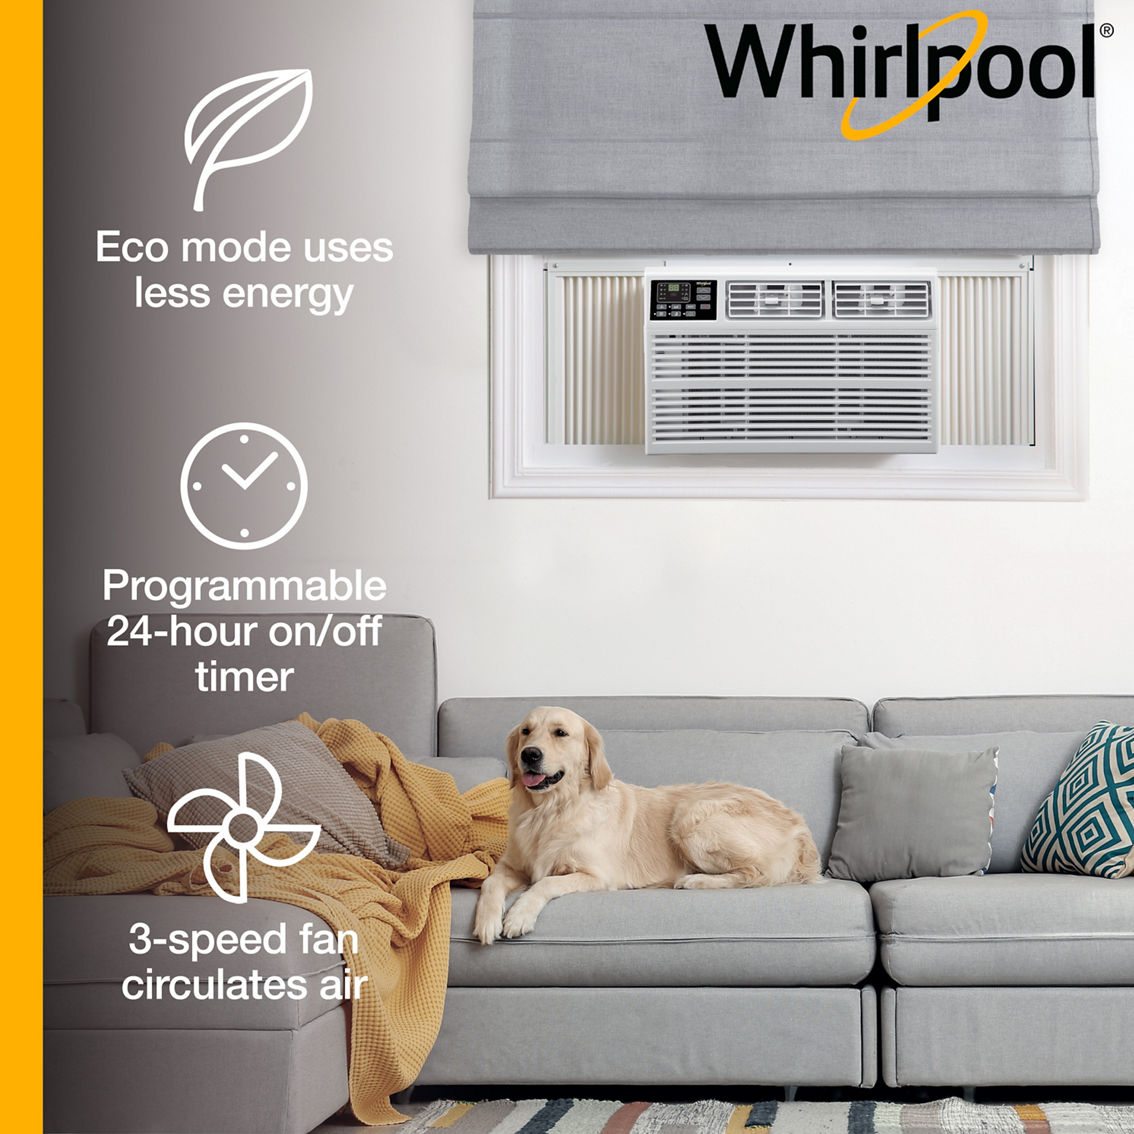 Whirlpool 15,000 BTU 115V Window-Mounted Air Conditioner with Remote Control - Image 6 of 6